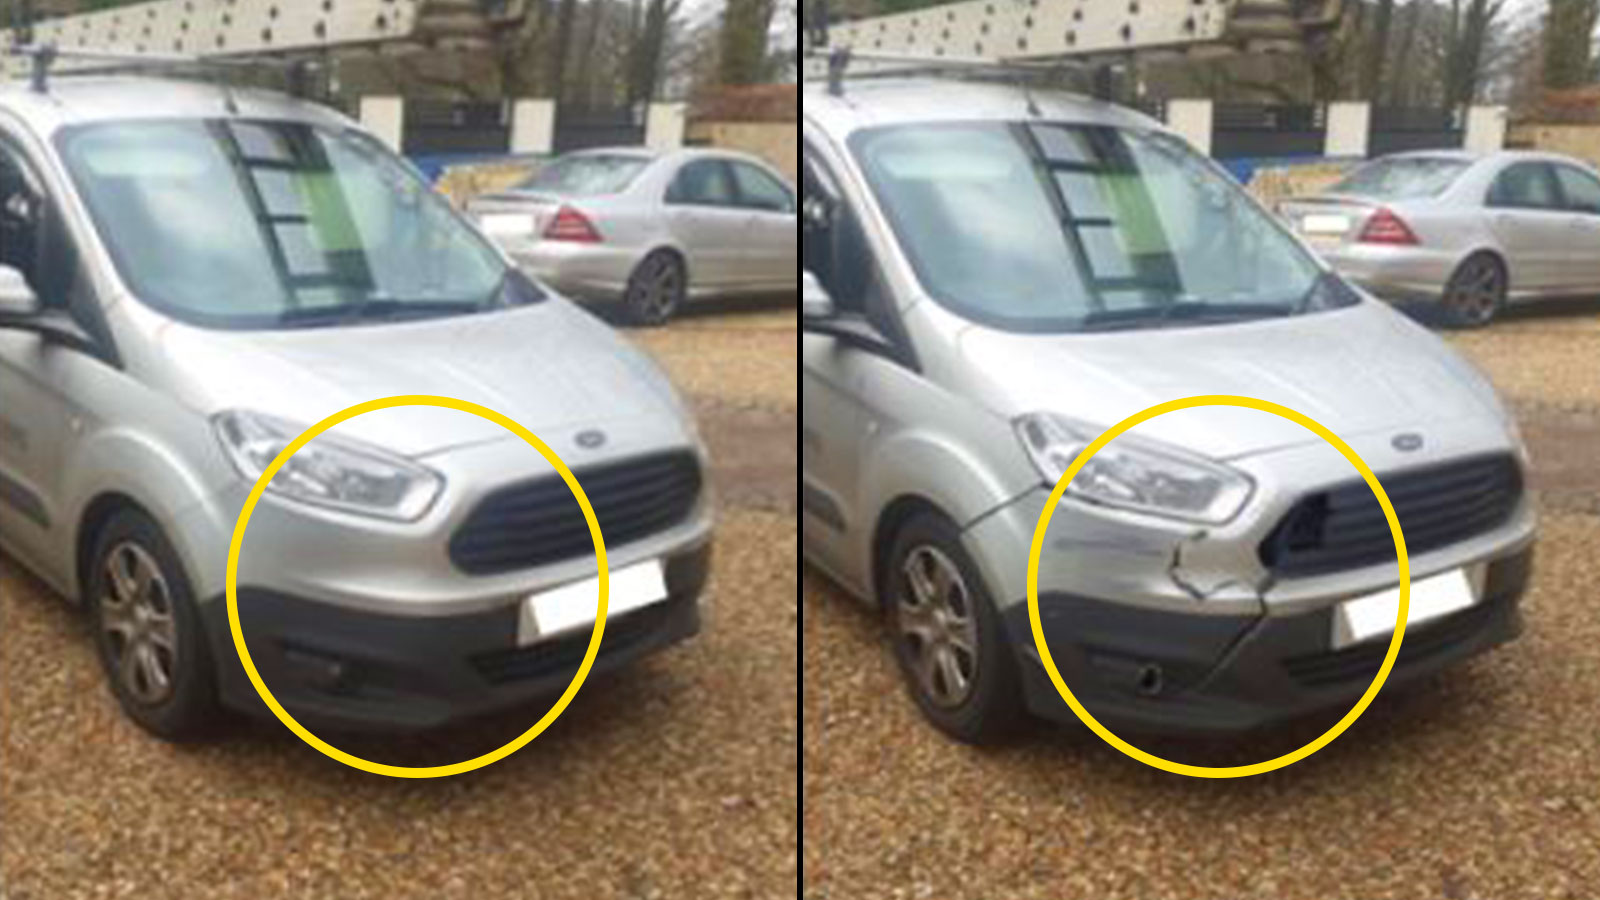 Frauds submitted this fake bumper damage with a repair invoice for more than £1,000. It was rejected